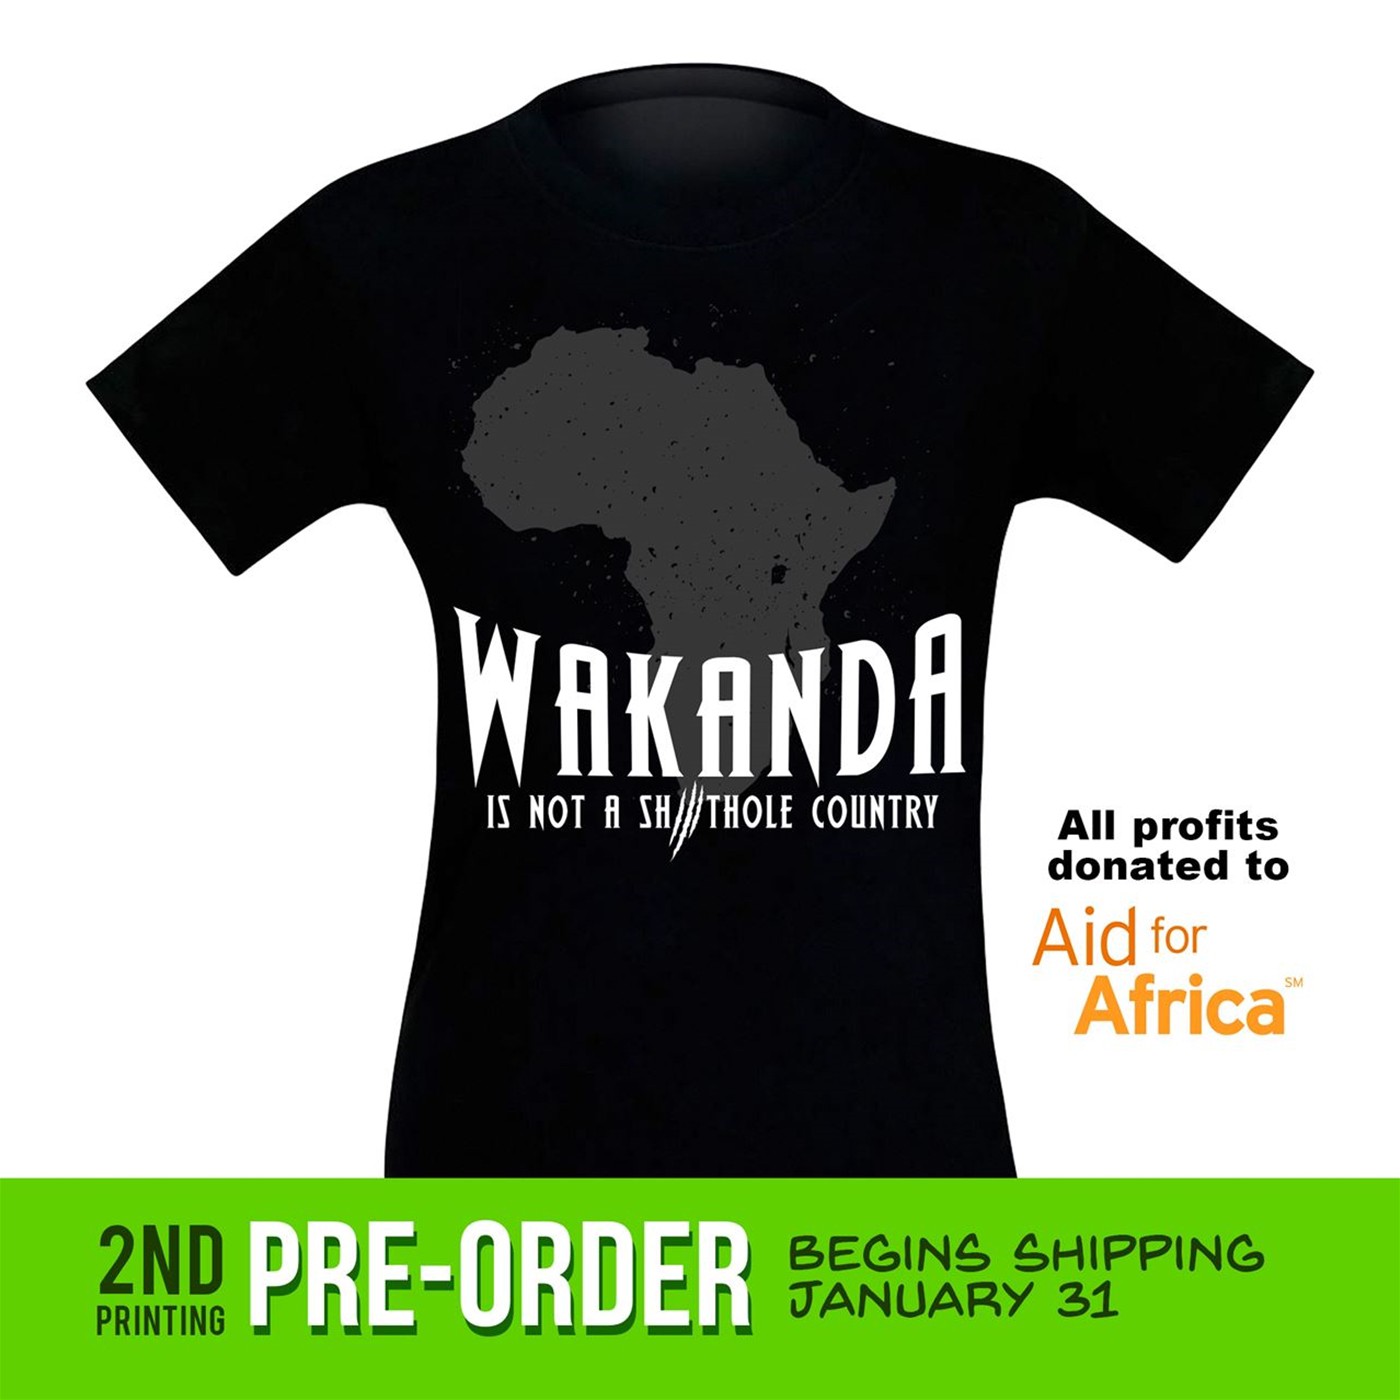 Wakanda Is NOT a Shithole Country Men's T-Shirt Pre-Order